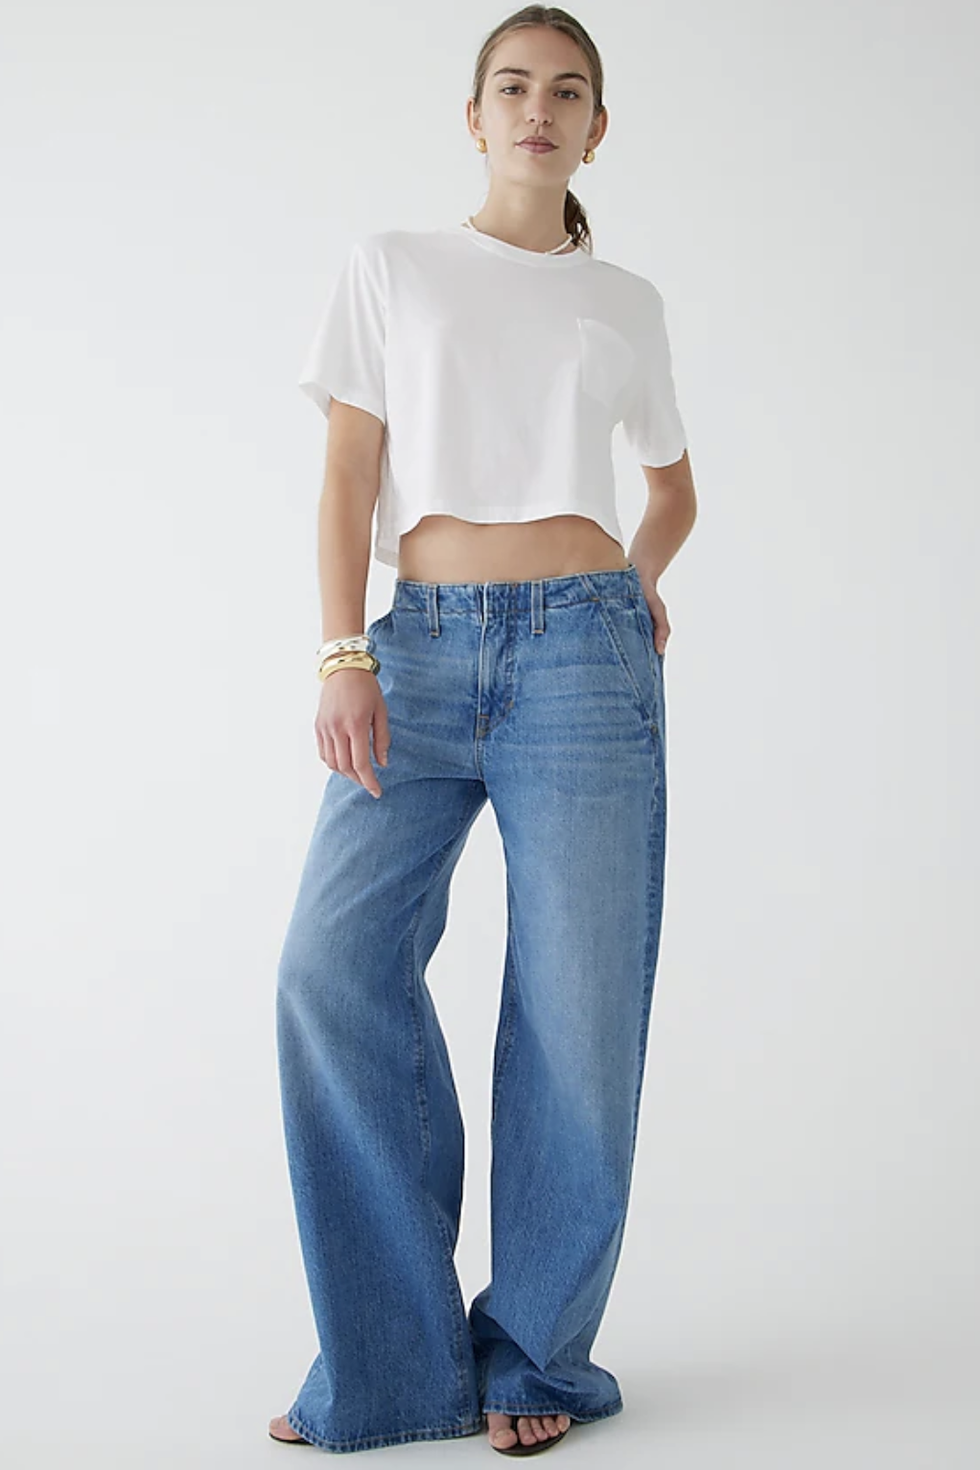 Women's Wide Leg Cropped Jeans from Crew Clothing Company